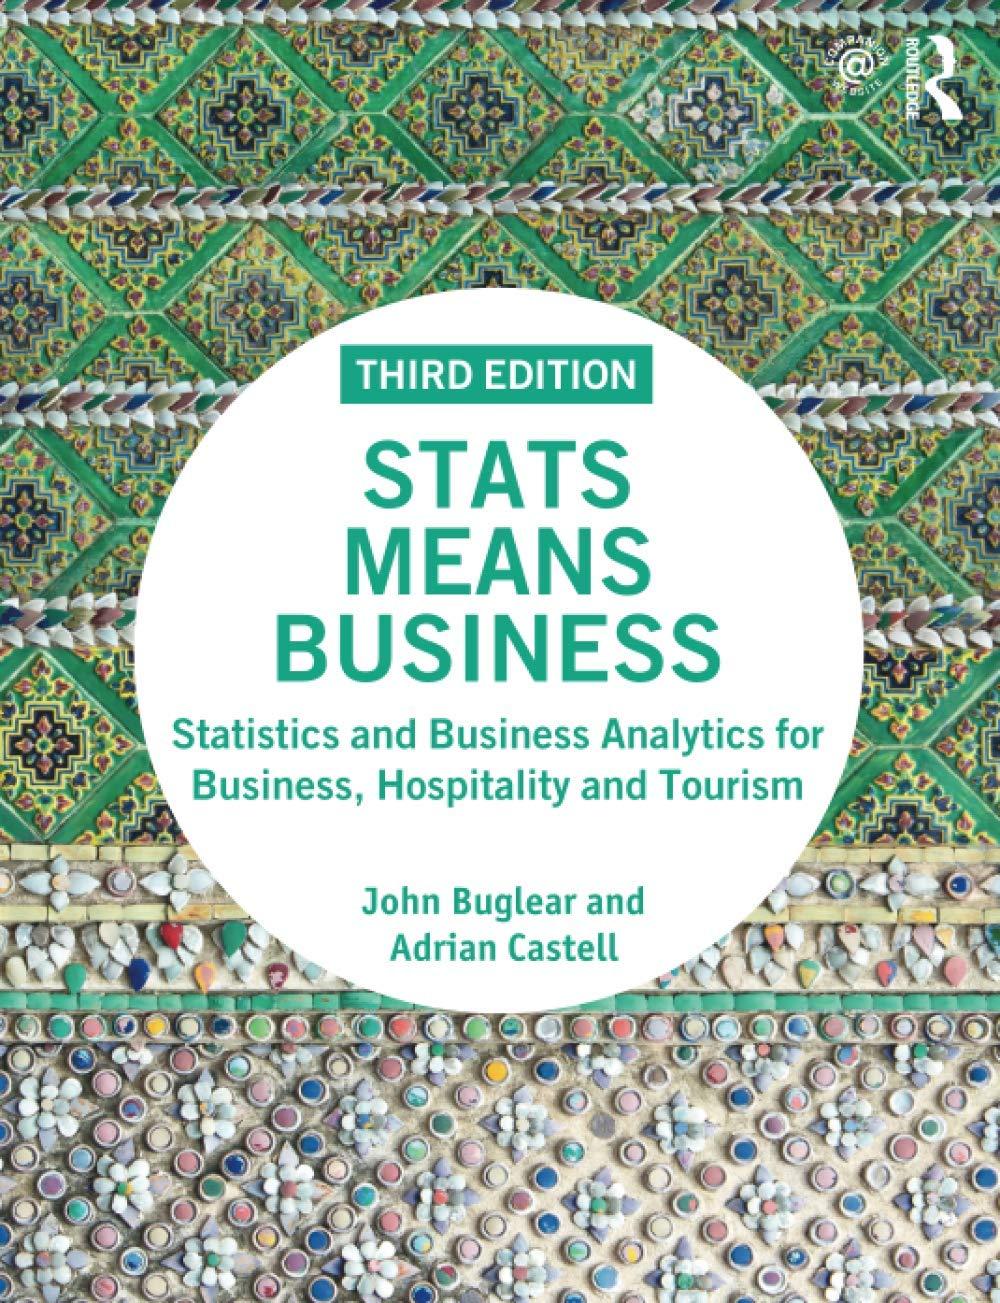 stats means business 3rd edition john buglear, adrian castell 1138588229, 9781138588226